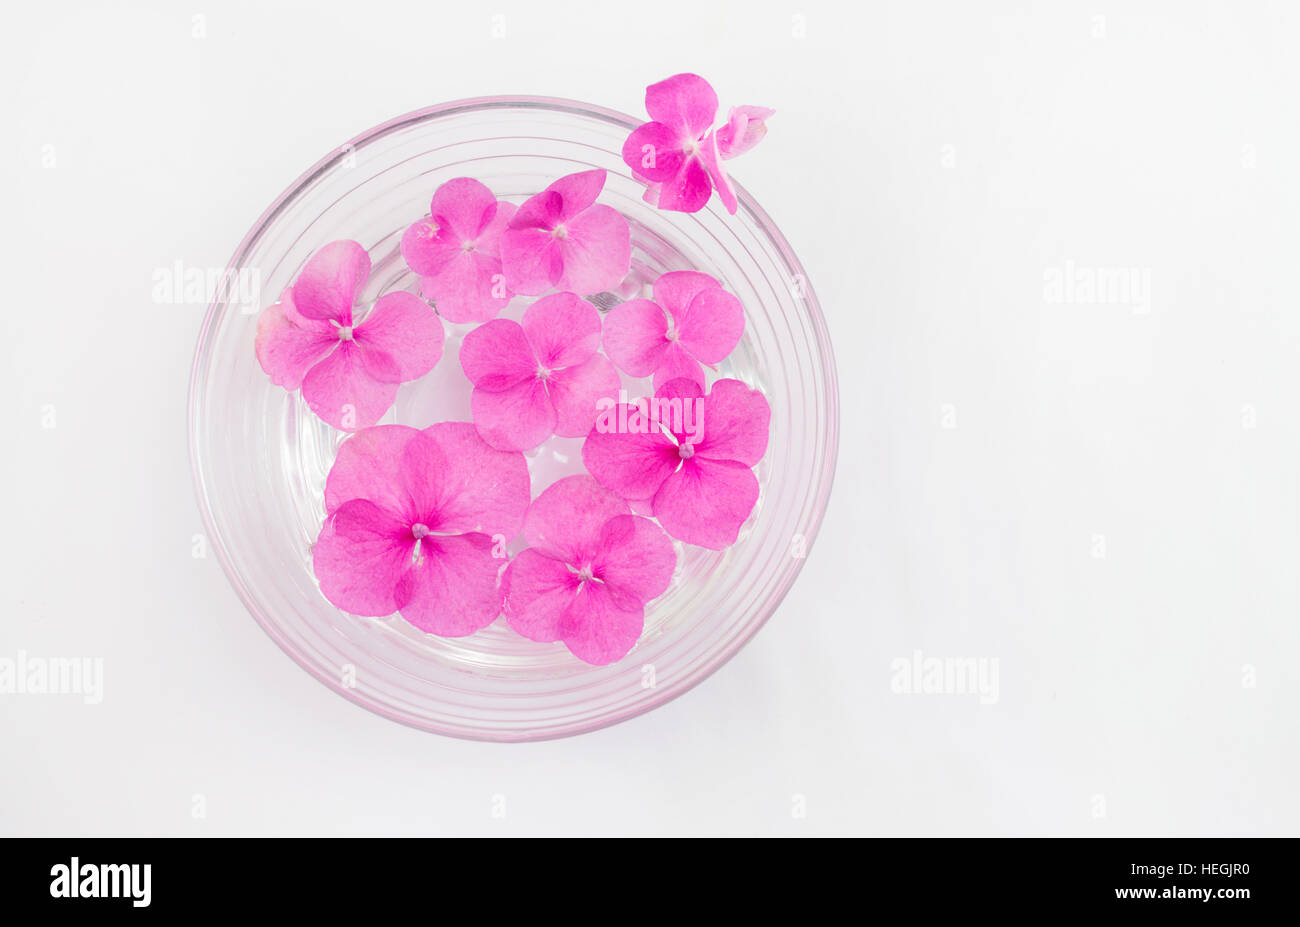 Hortensia spring flowers floating in a bowl of water Stock Photo